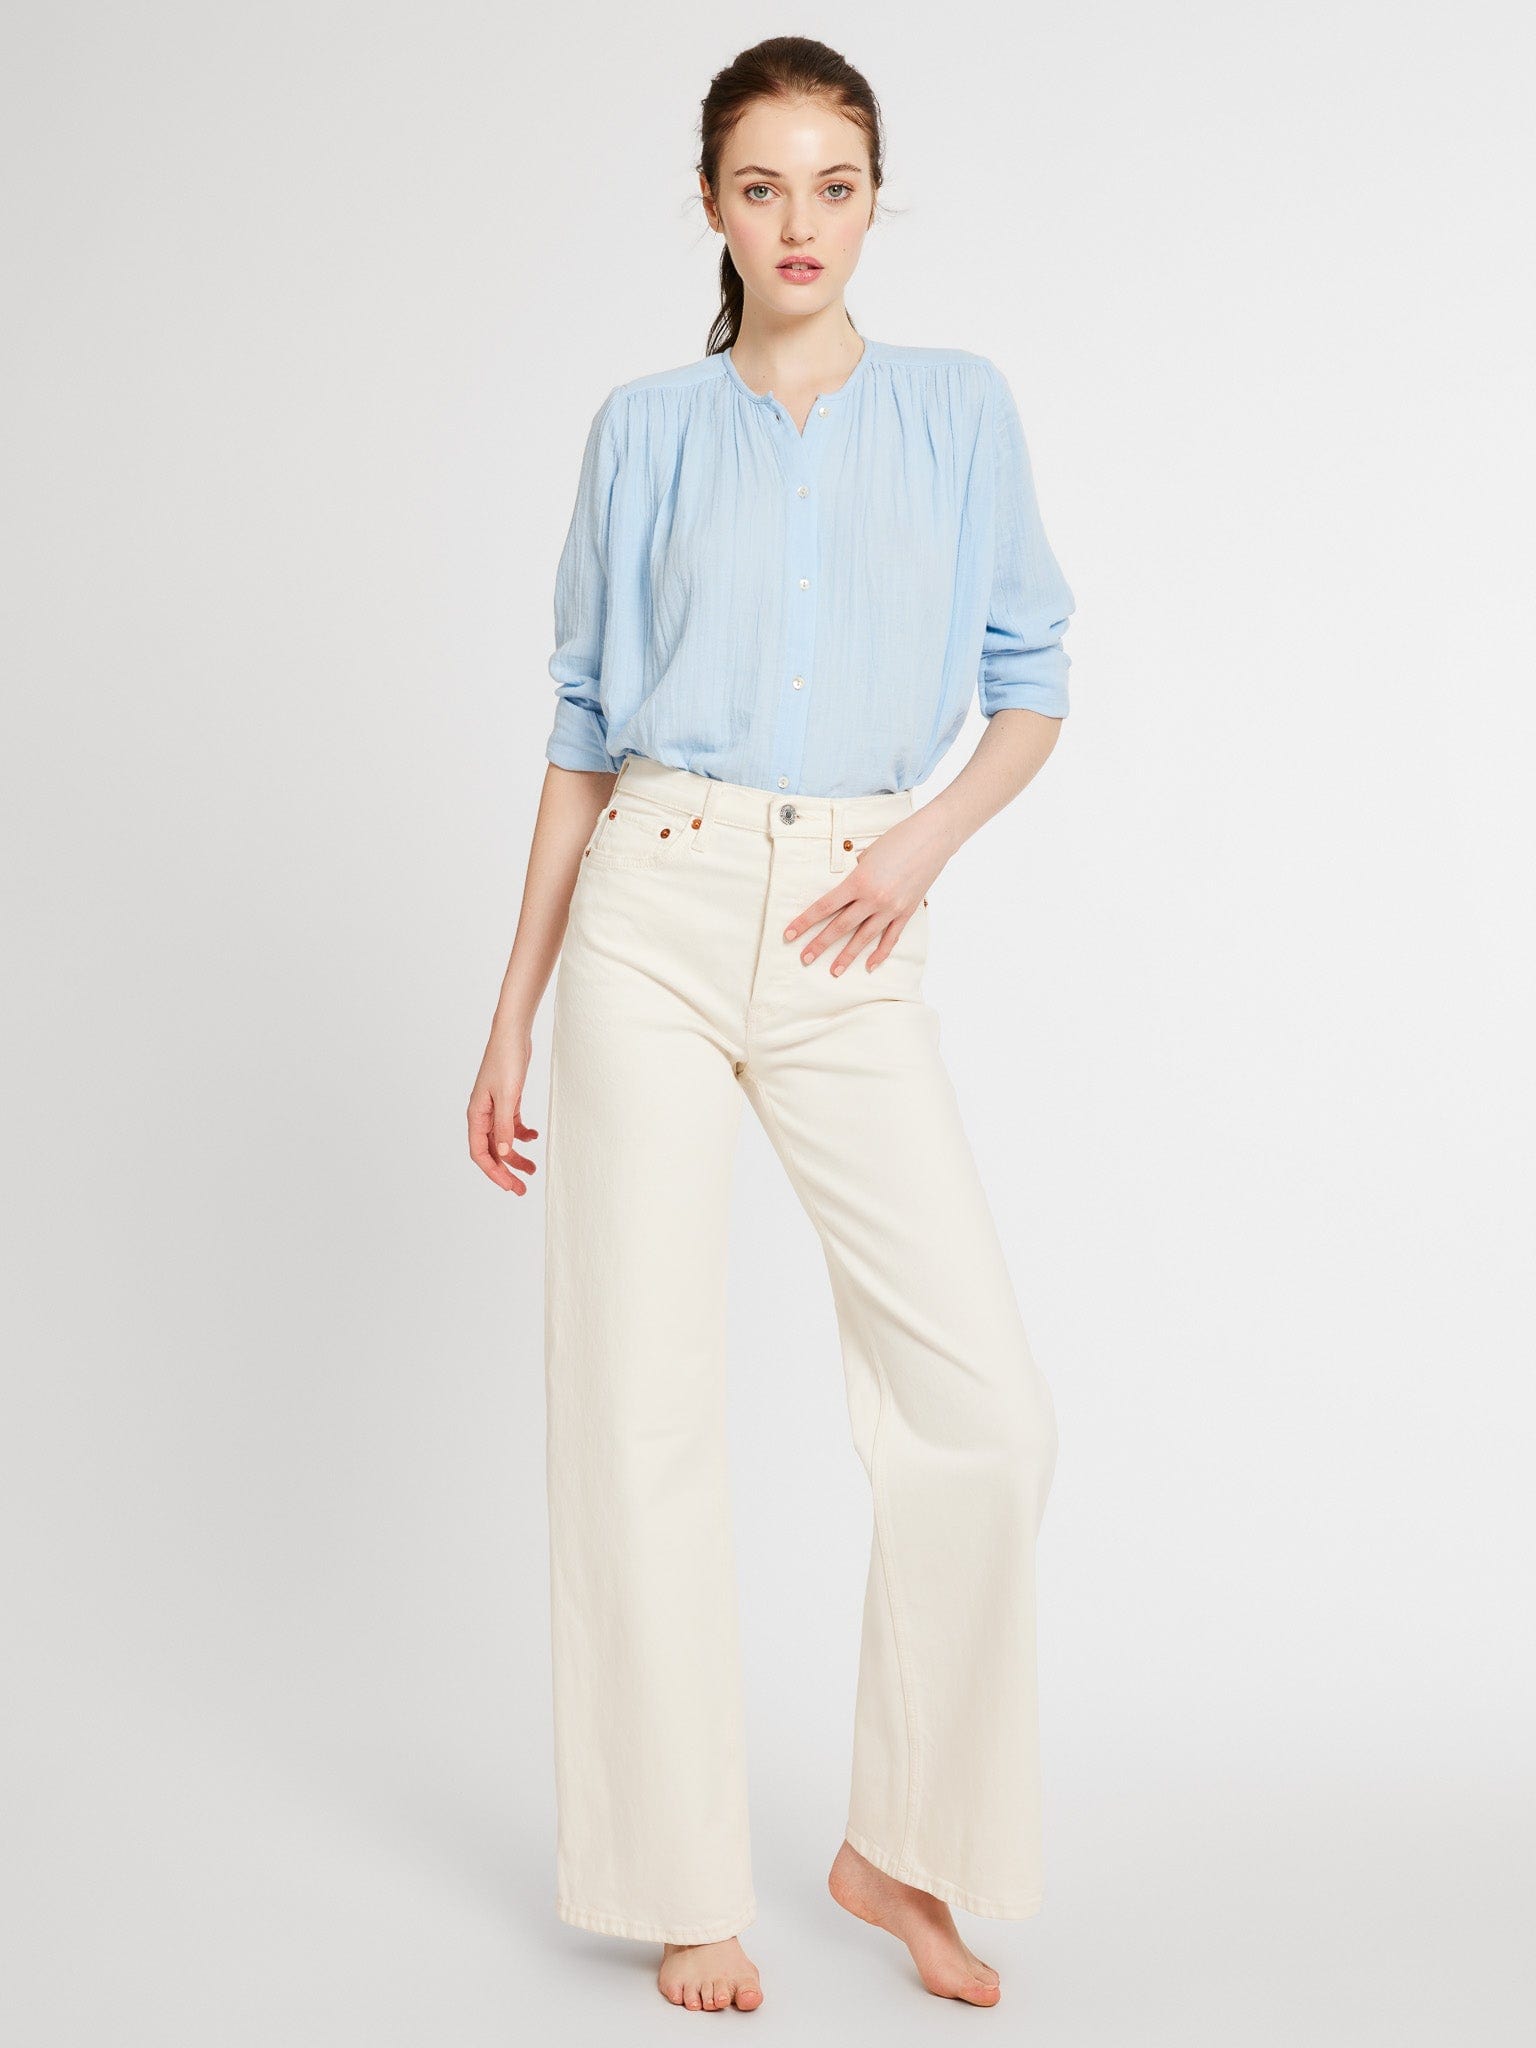 MILLE Clothing Florian Top in Riviera Double Gauze